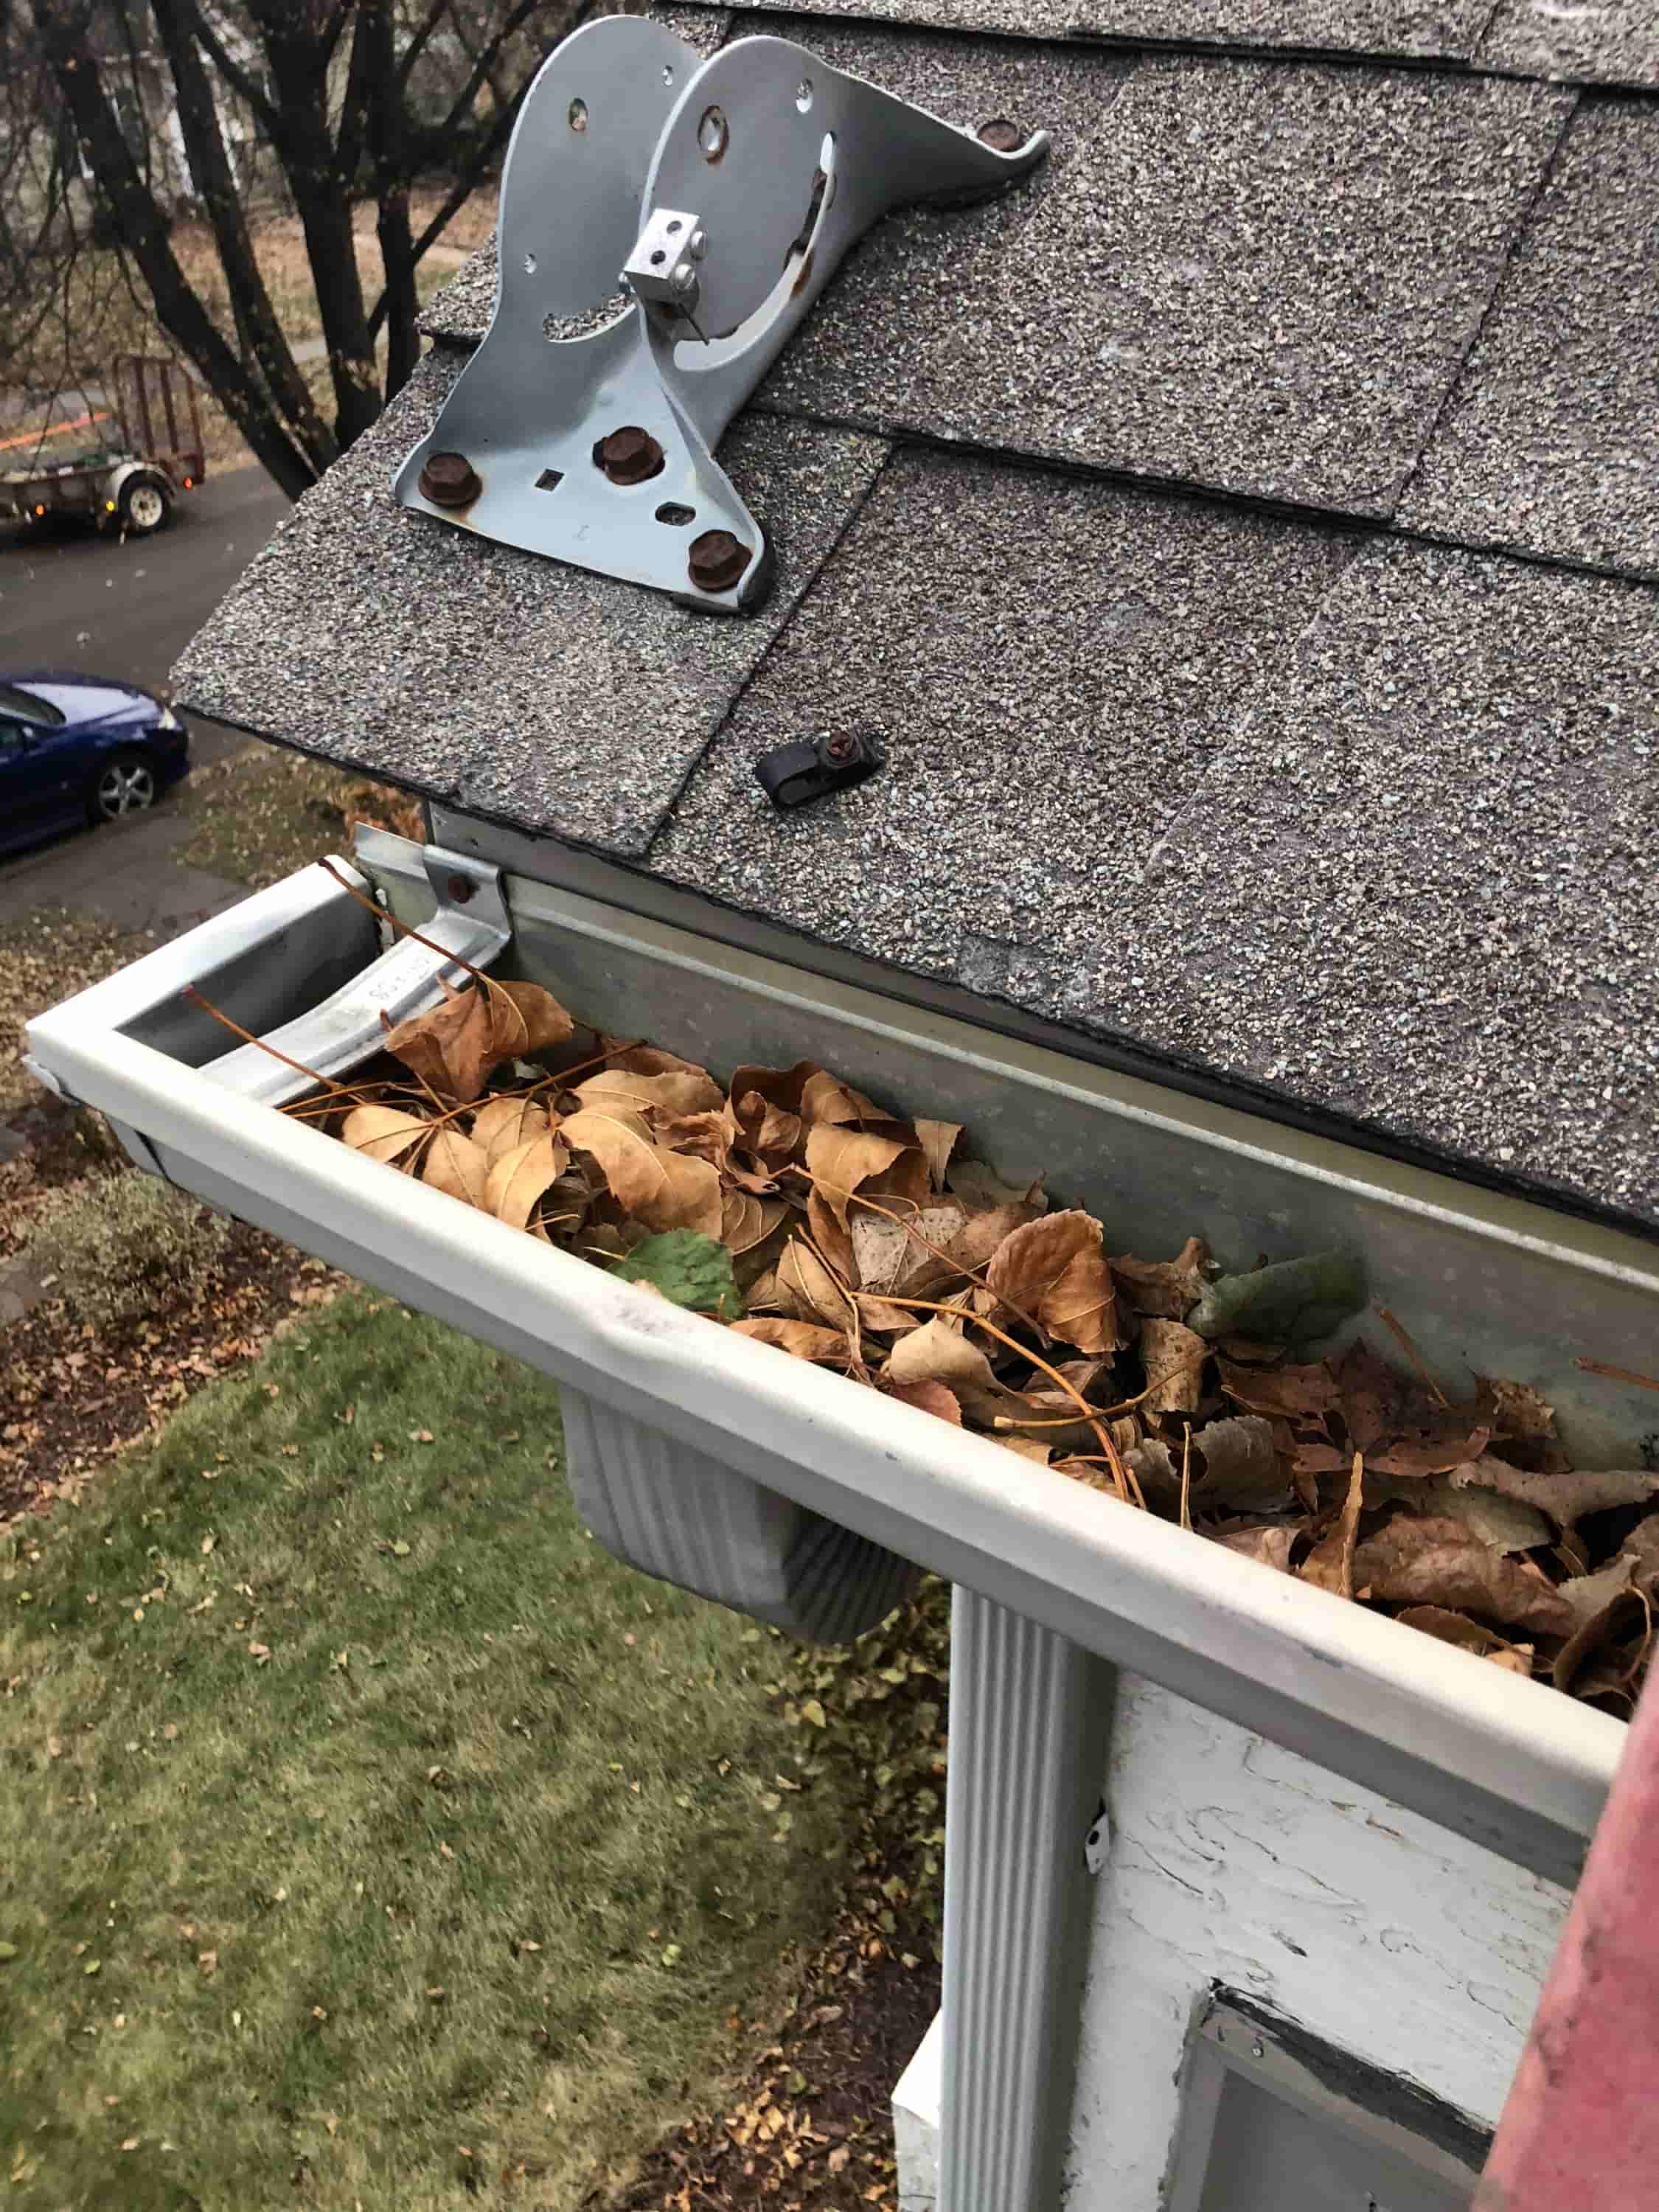 cleaning leaf guard gutters